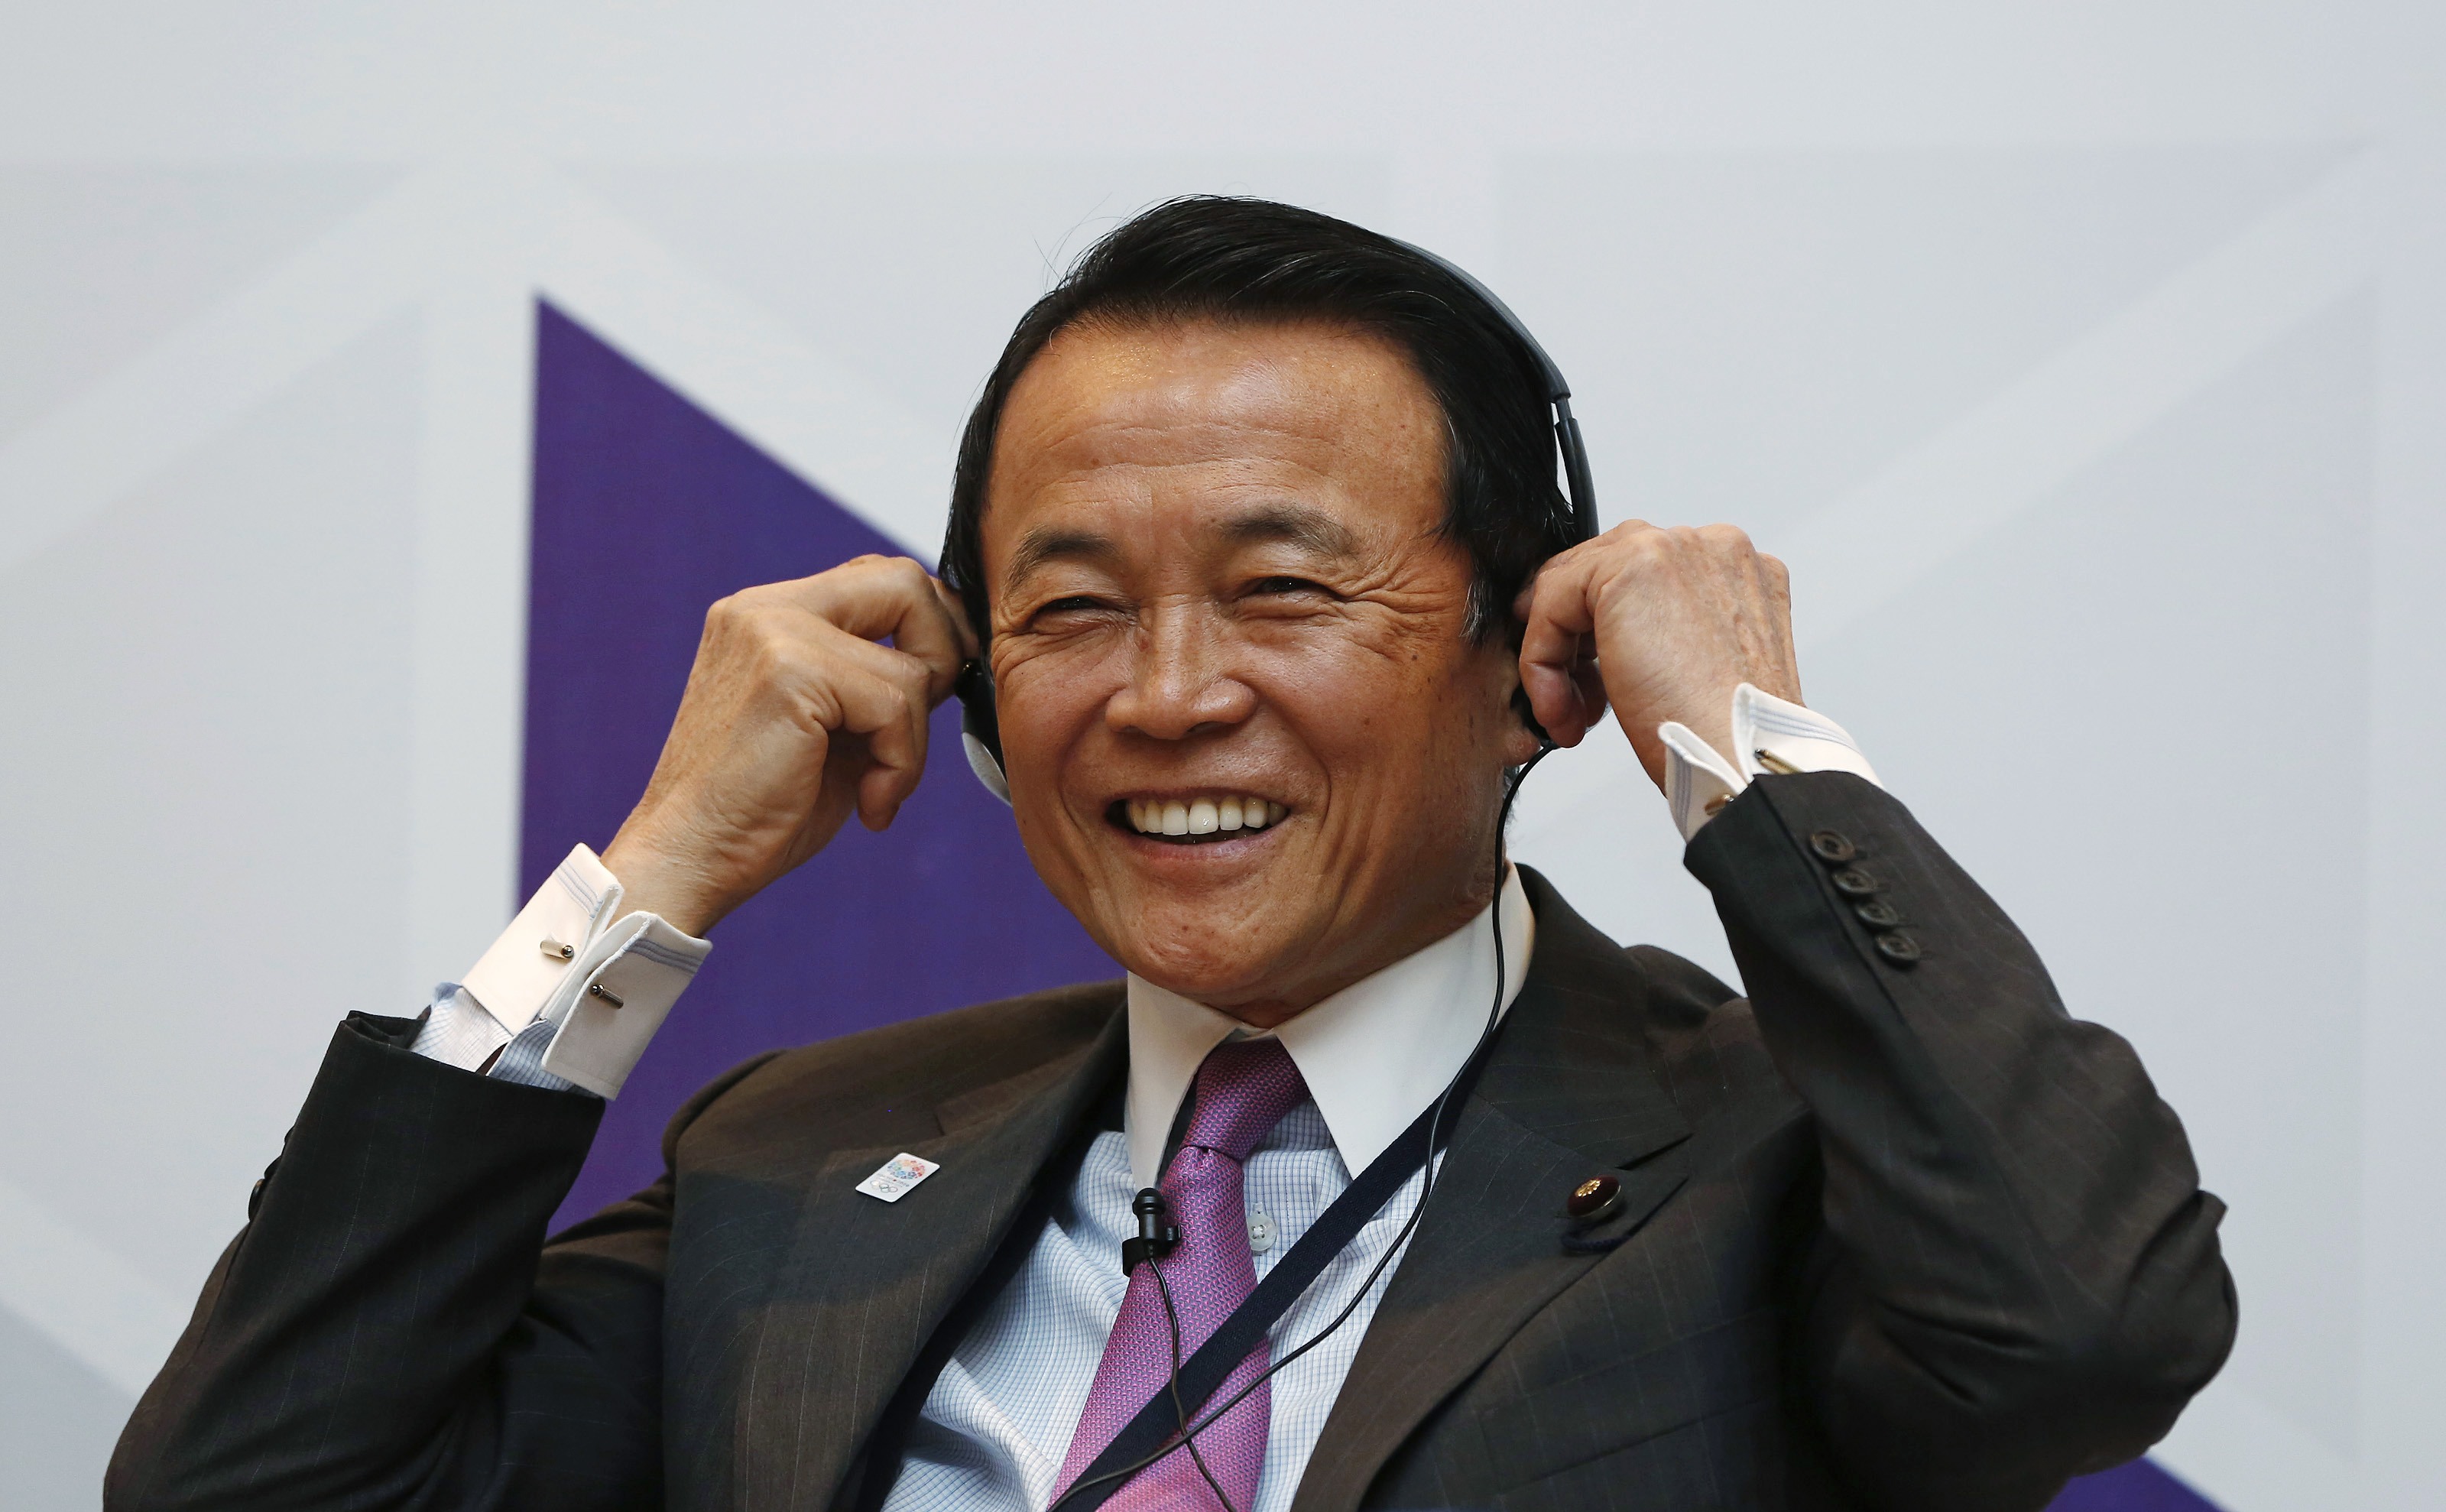 Japan never had smooth ties with China: deputy PM Aso